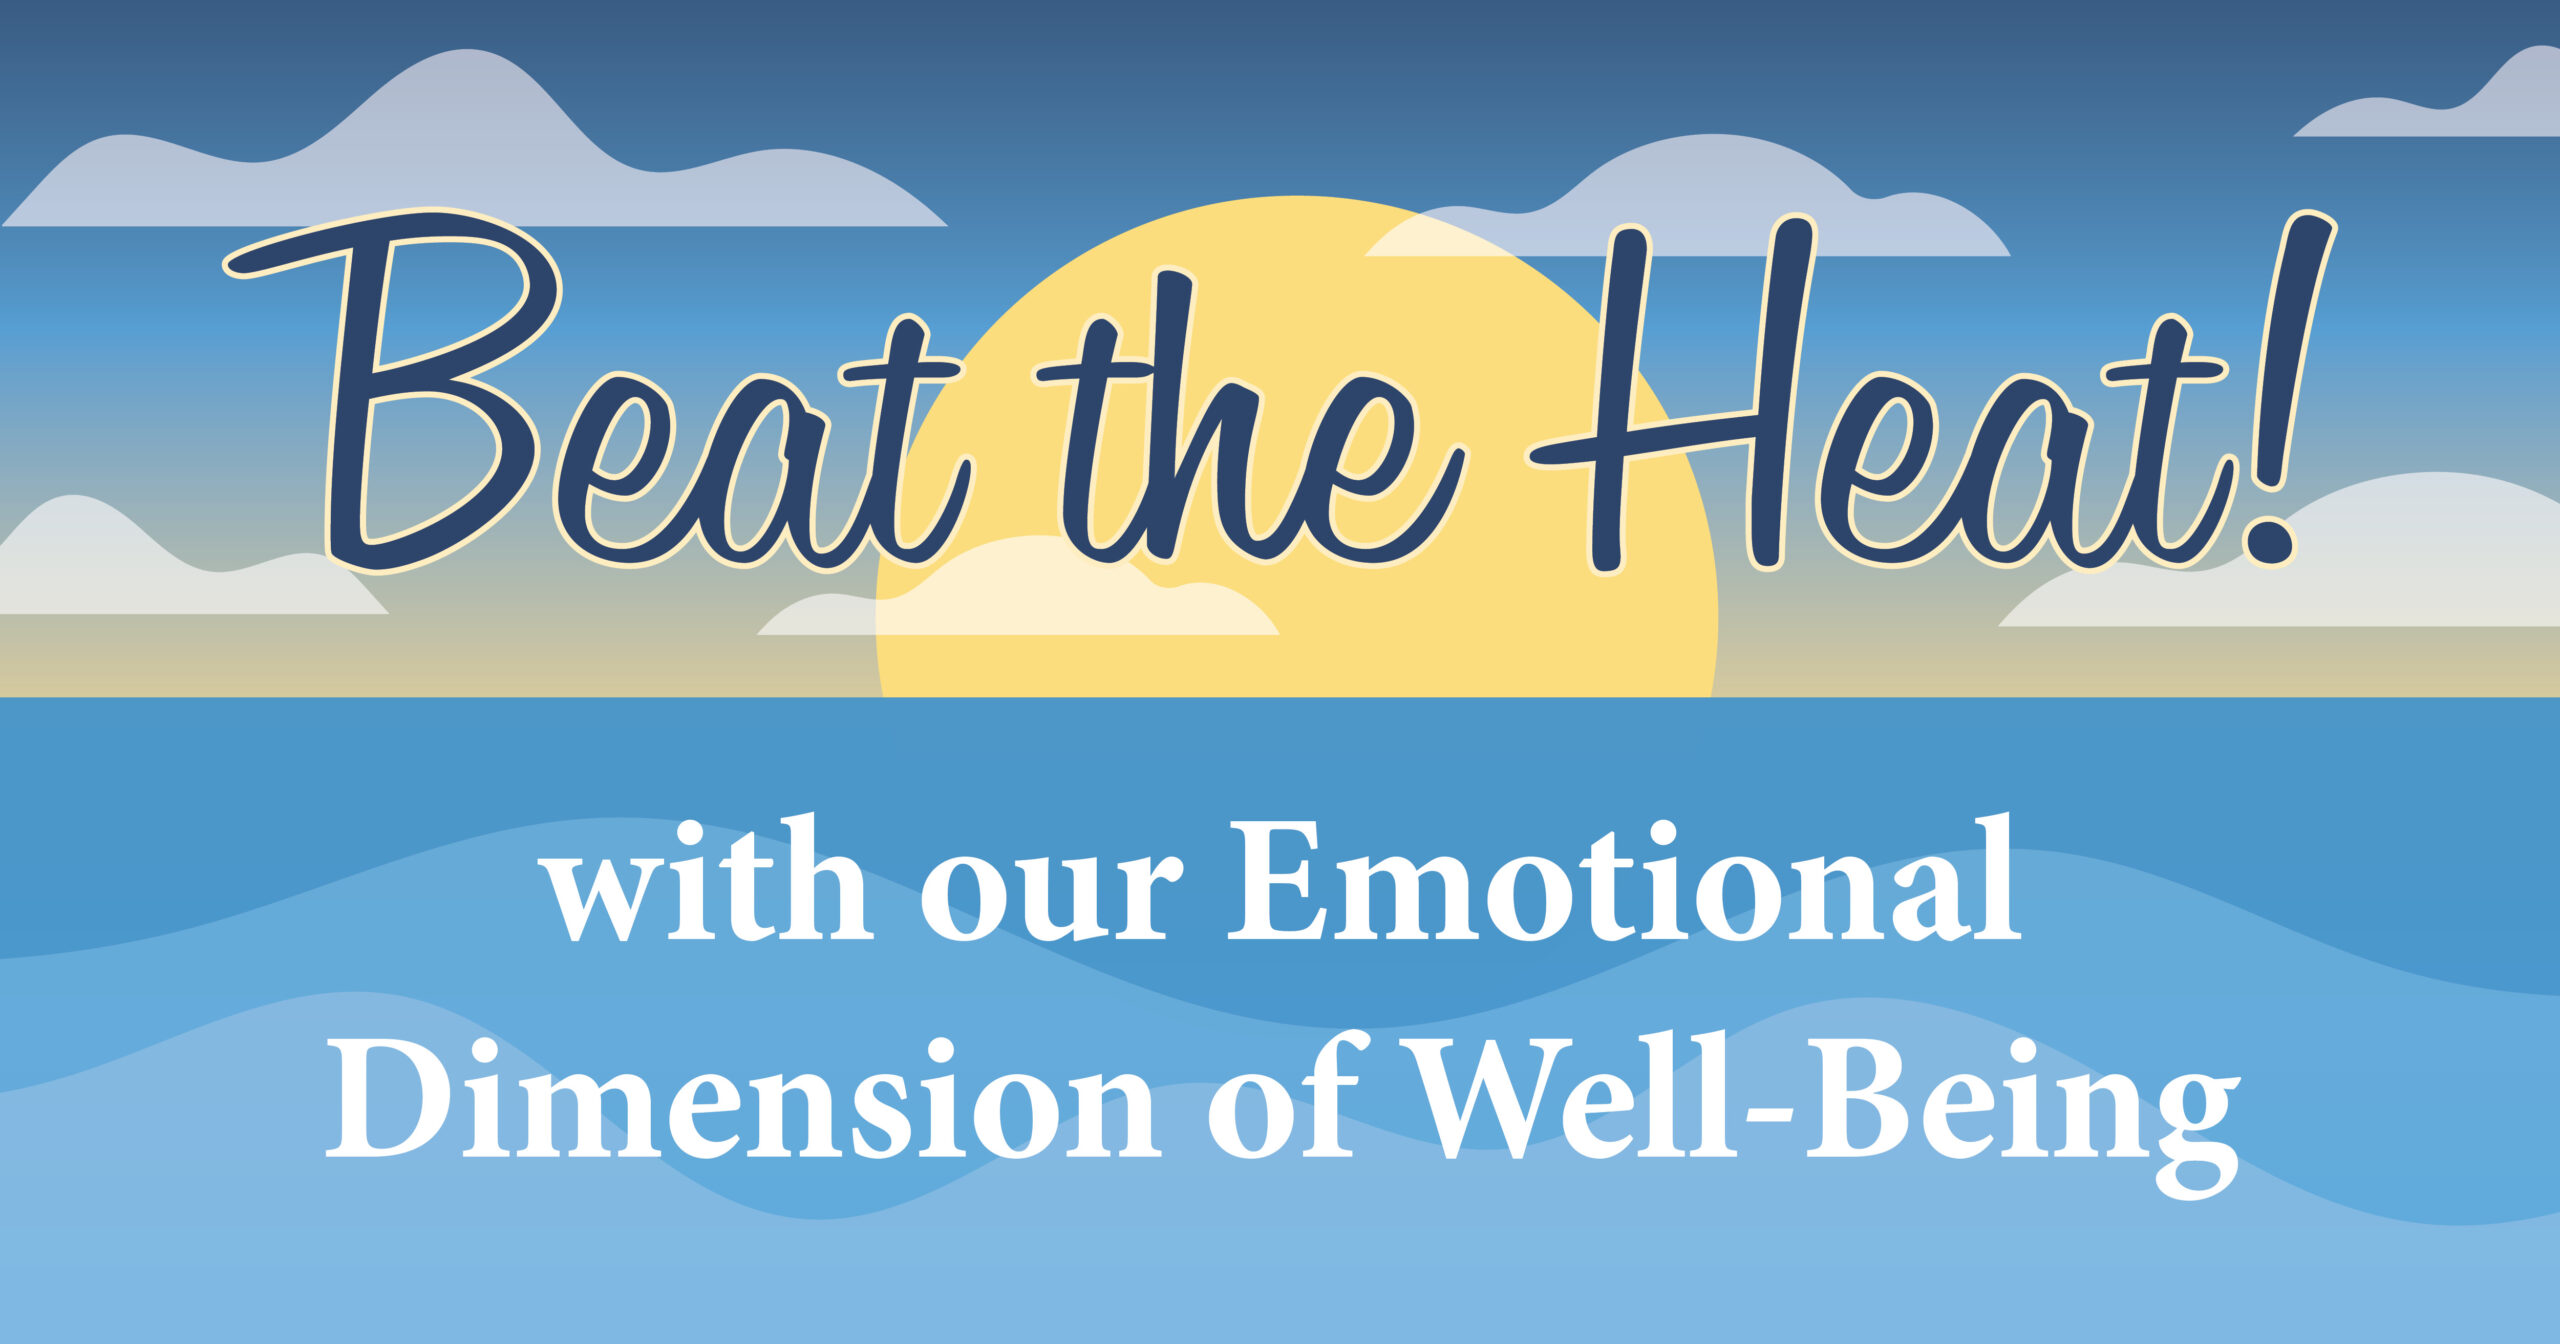 Achieving Emotional Wellbeing Through Our Eight Dimensions of Well-Being